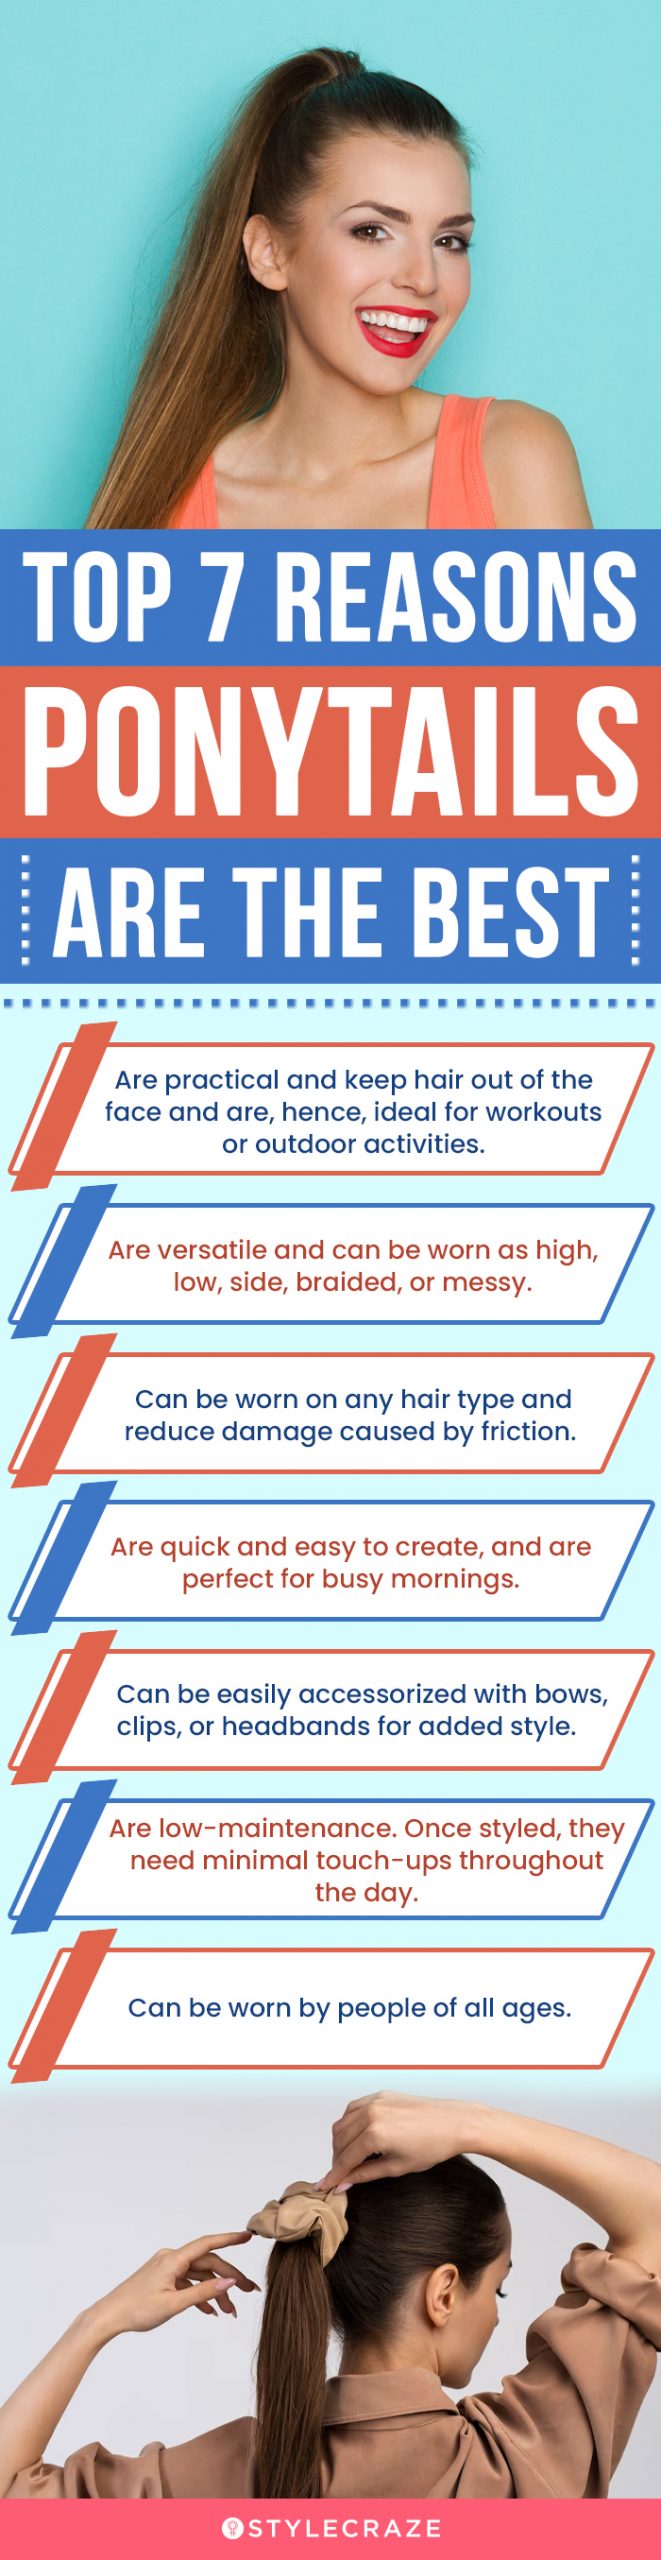 7 top reasons ponytails are the best (infographic)